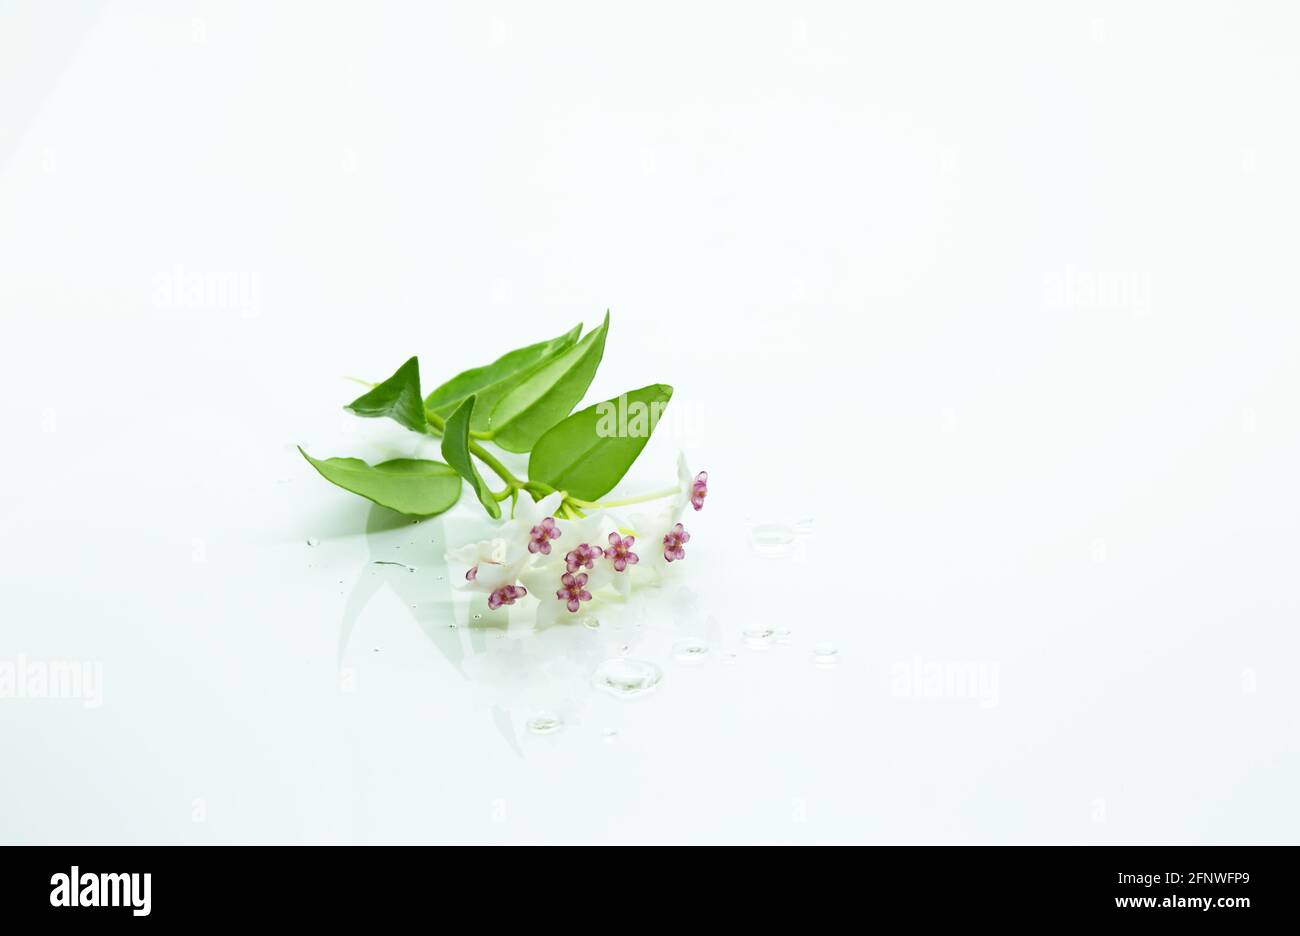 Hoya bella flowers and some water drops isolated on white back ground Stock Photo